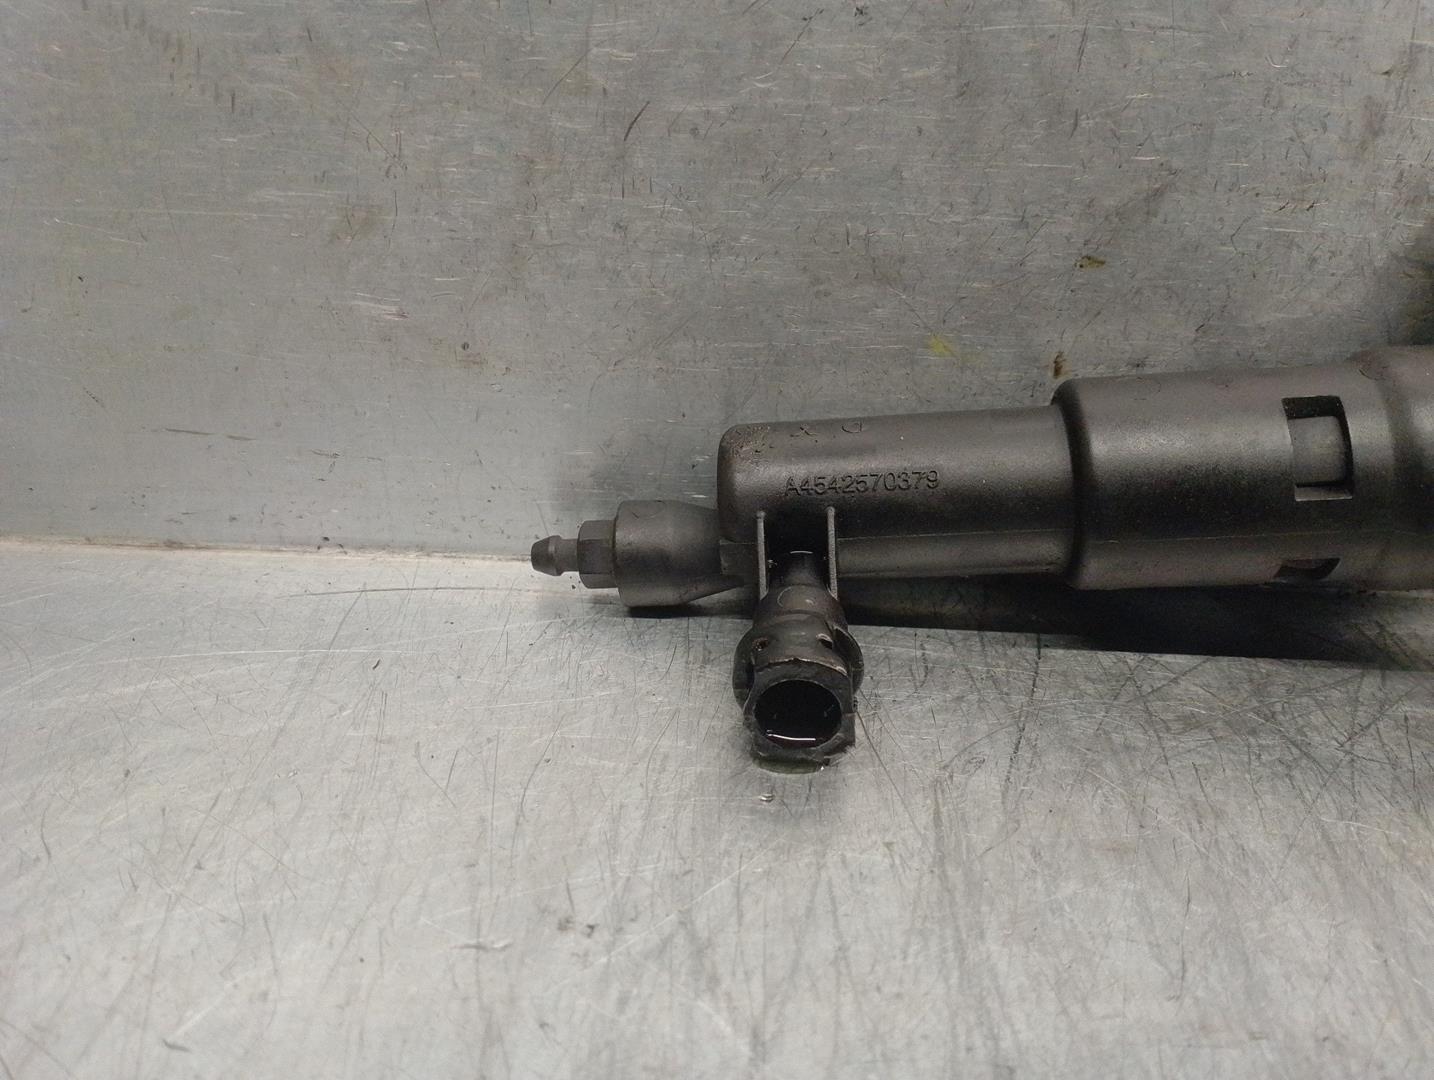 SMART Forfour 1 generation (2004-2006) Clutch Cylinder A4542570379, A4542570379 19913135